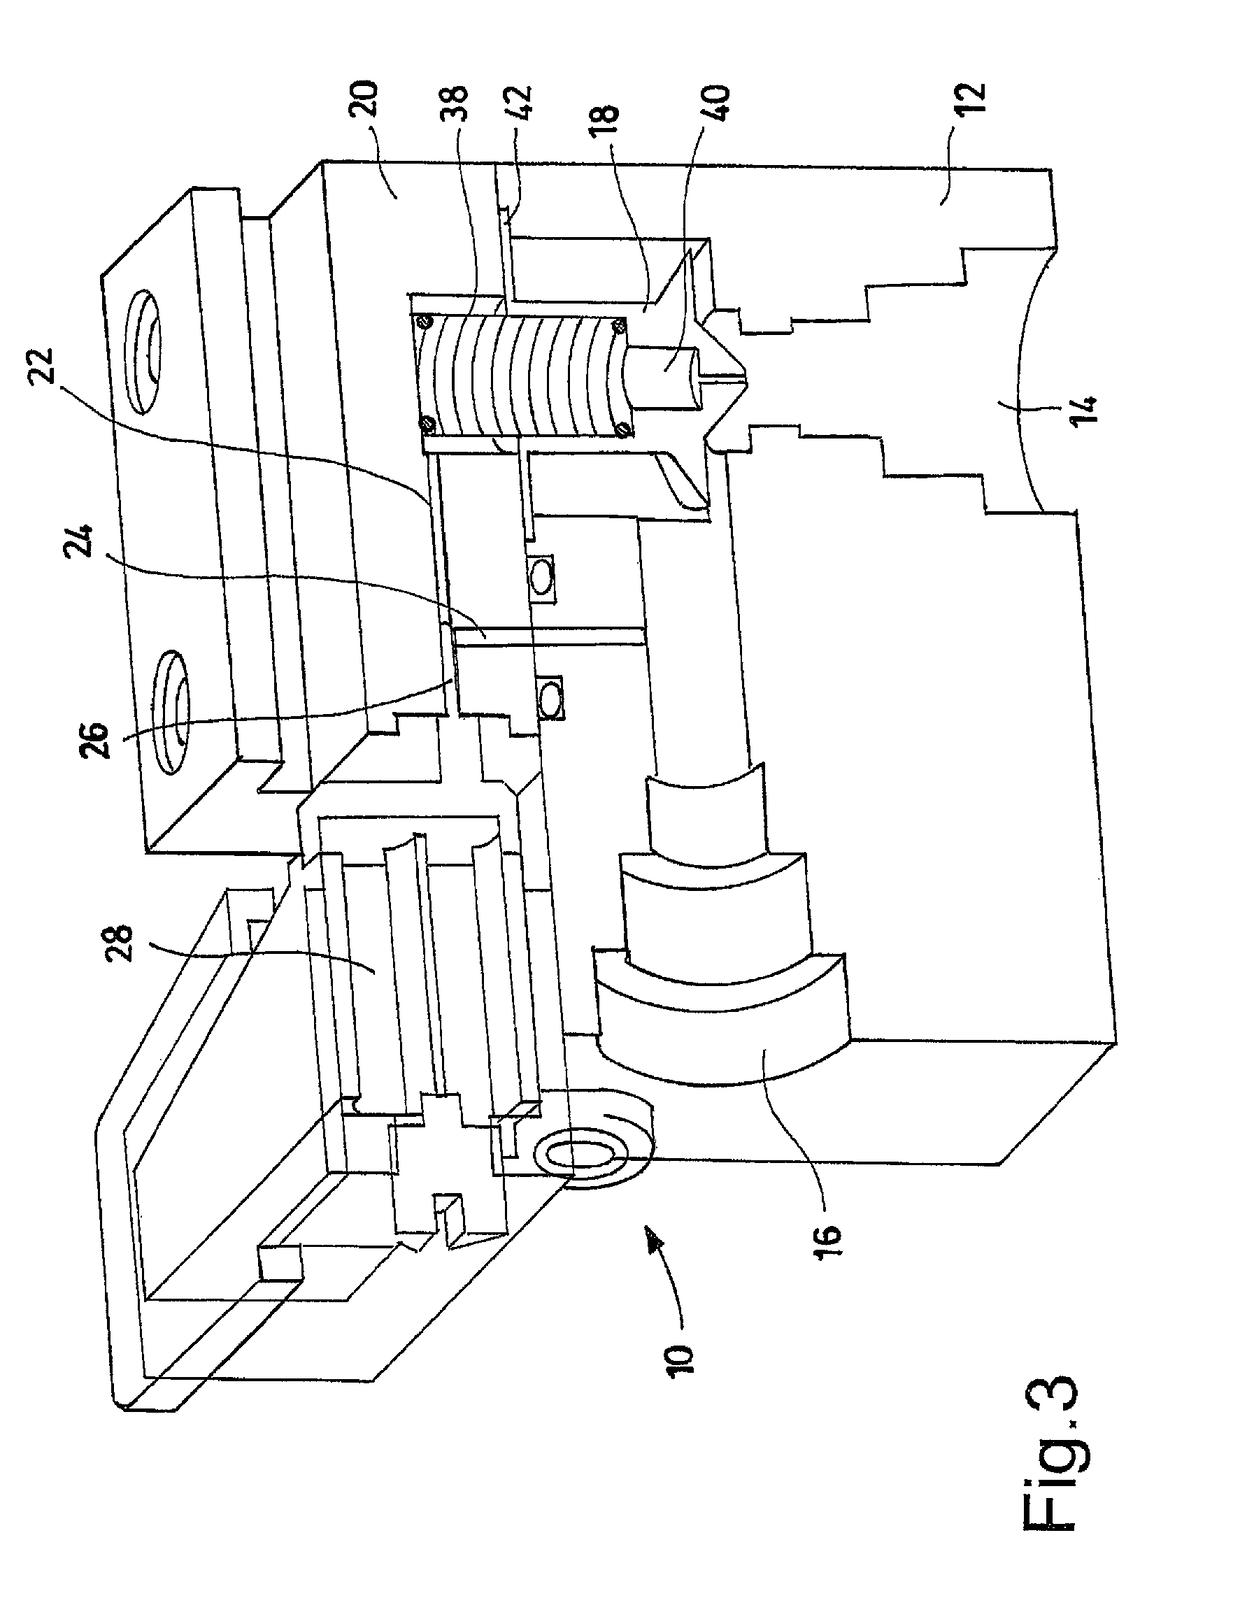 Two-stage valve